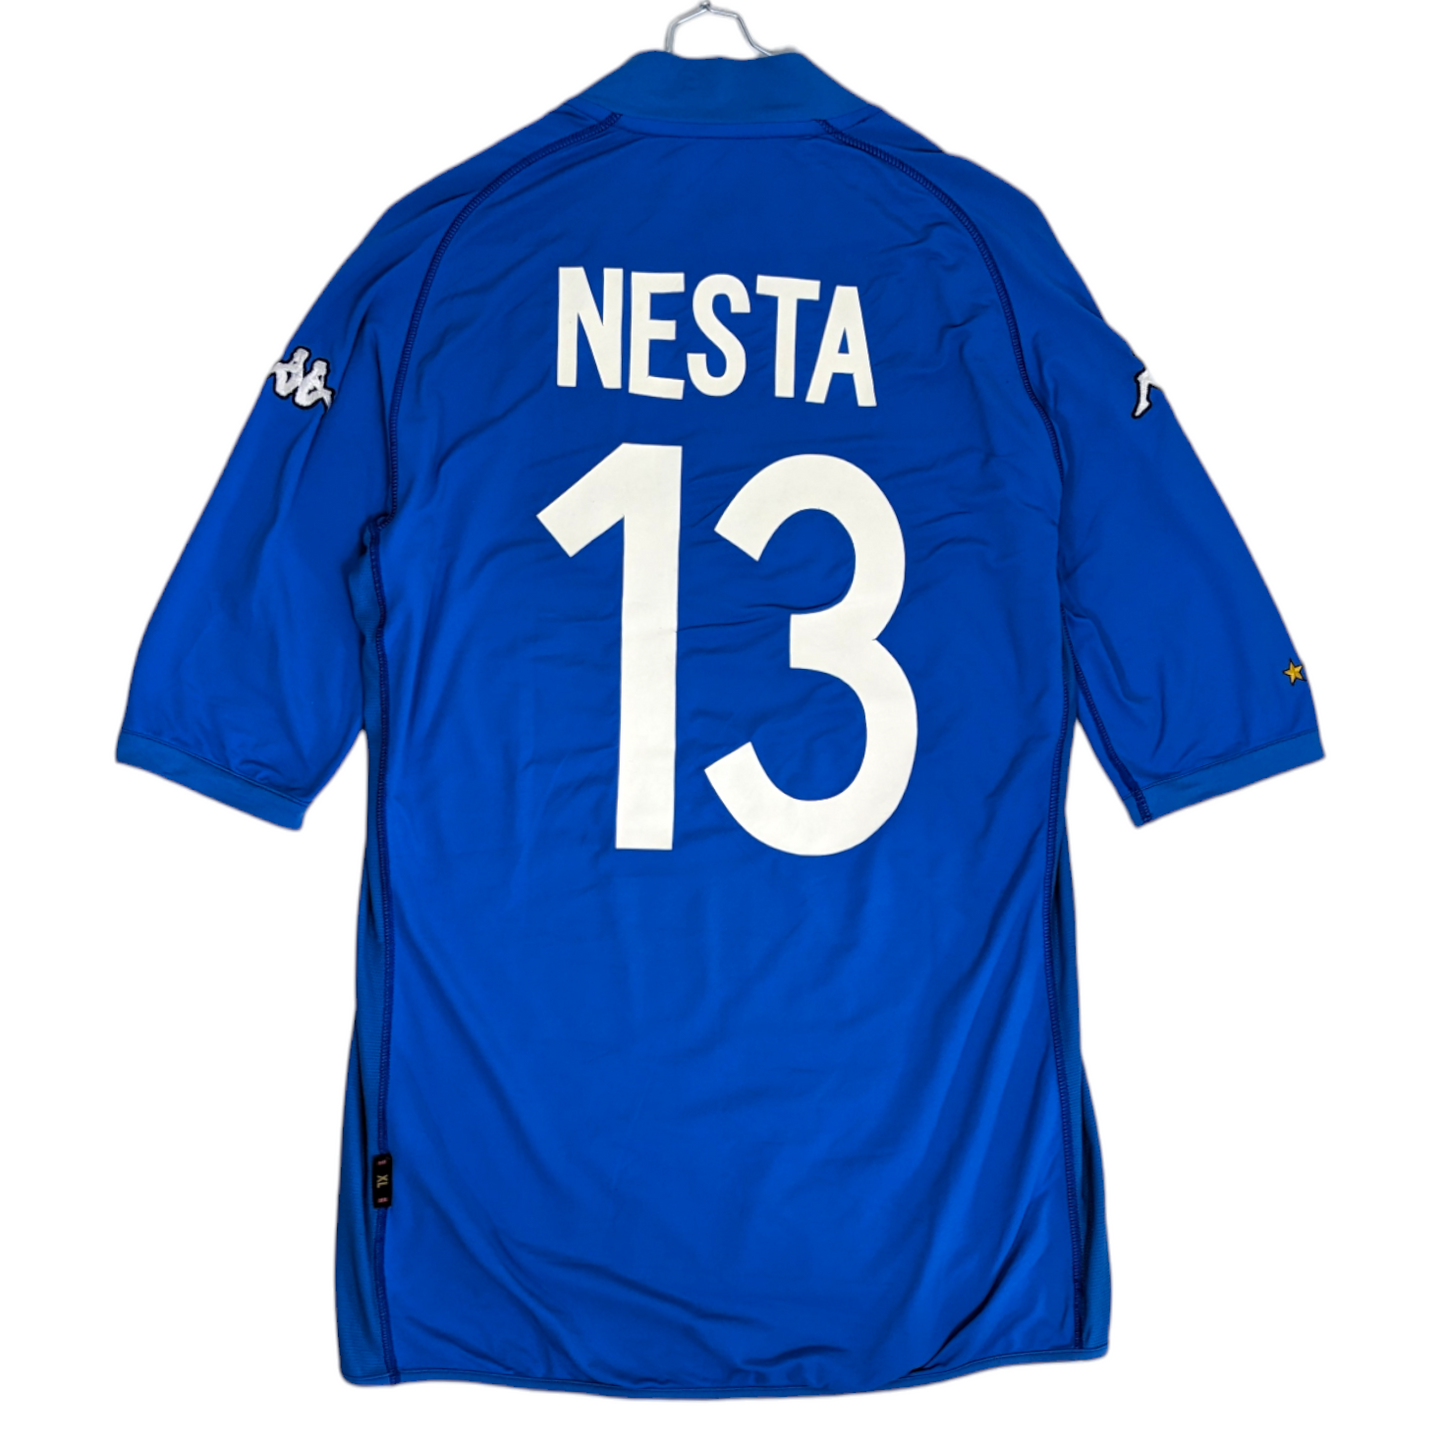 Authentic Italy 2002 Home - Nesta #13 Size XL